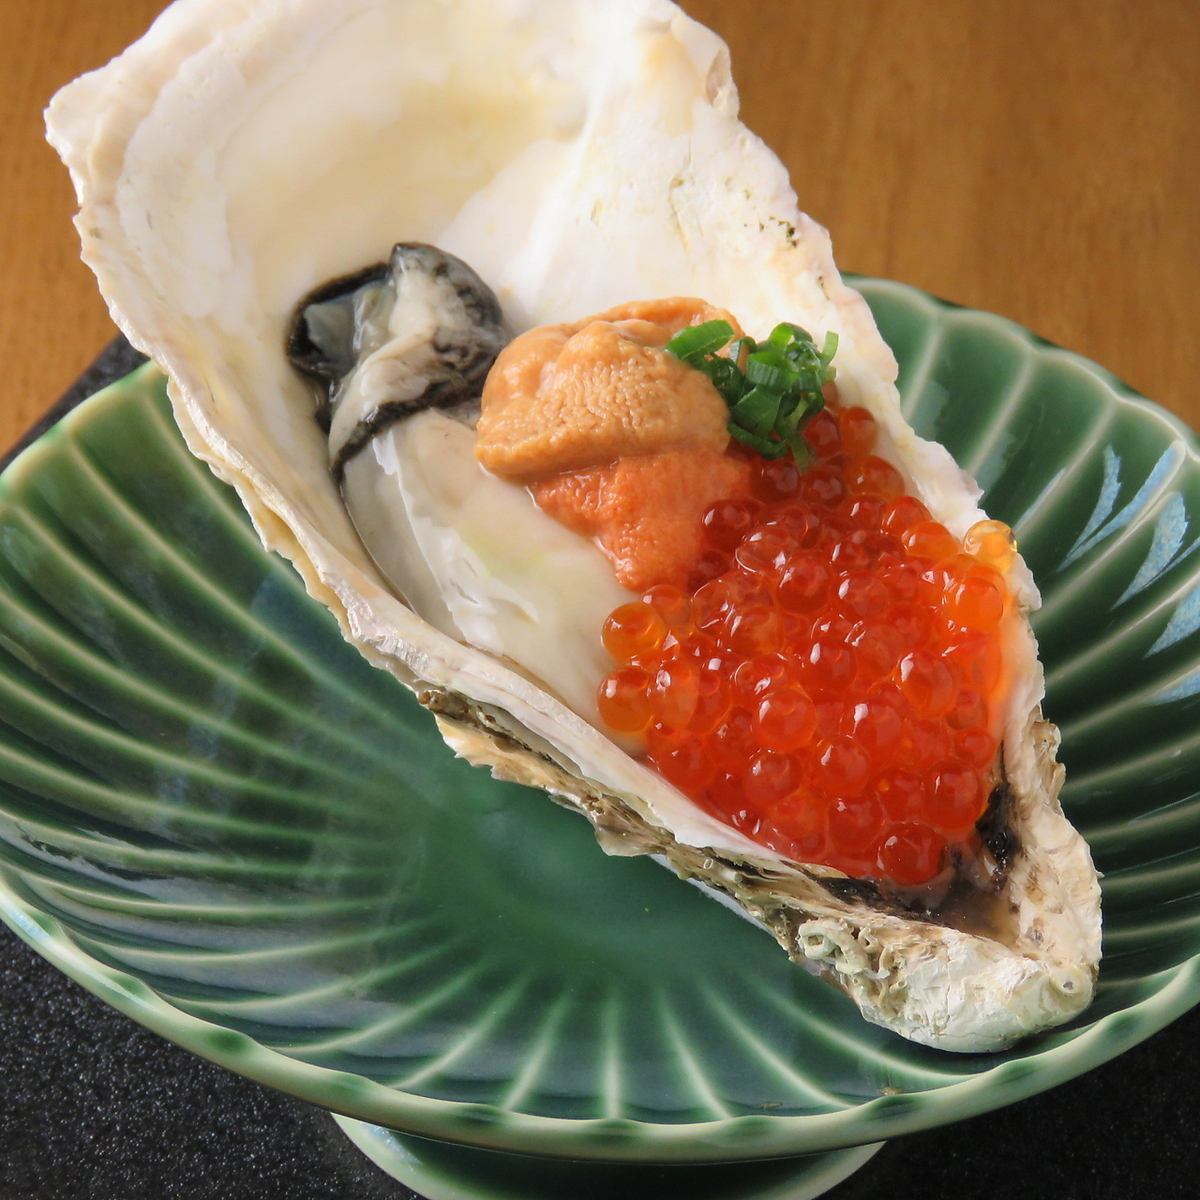 Outstanding freshness! A variety of dishes that look great and make you want to take pictures♪